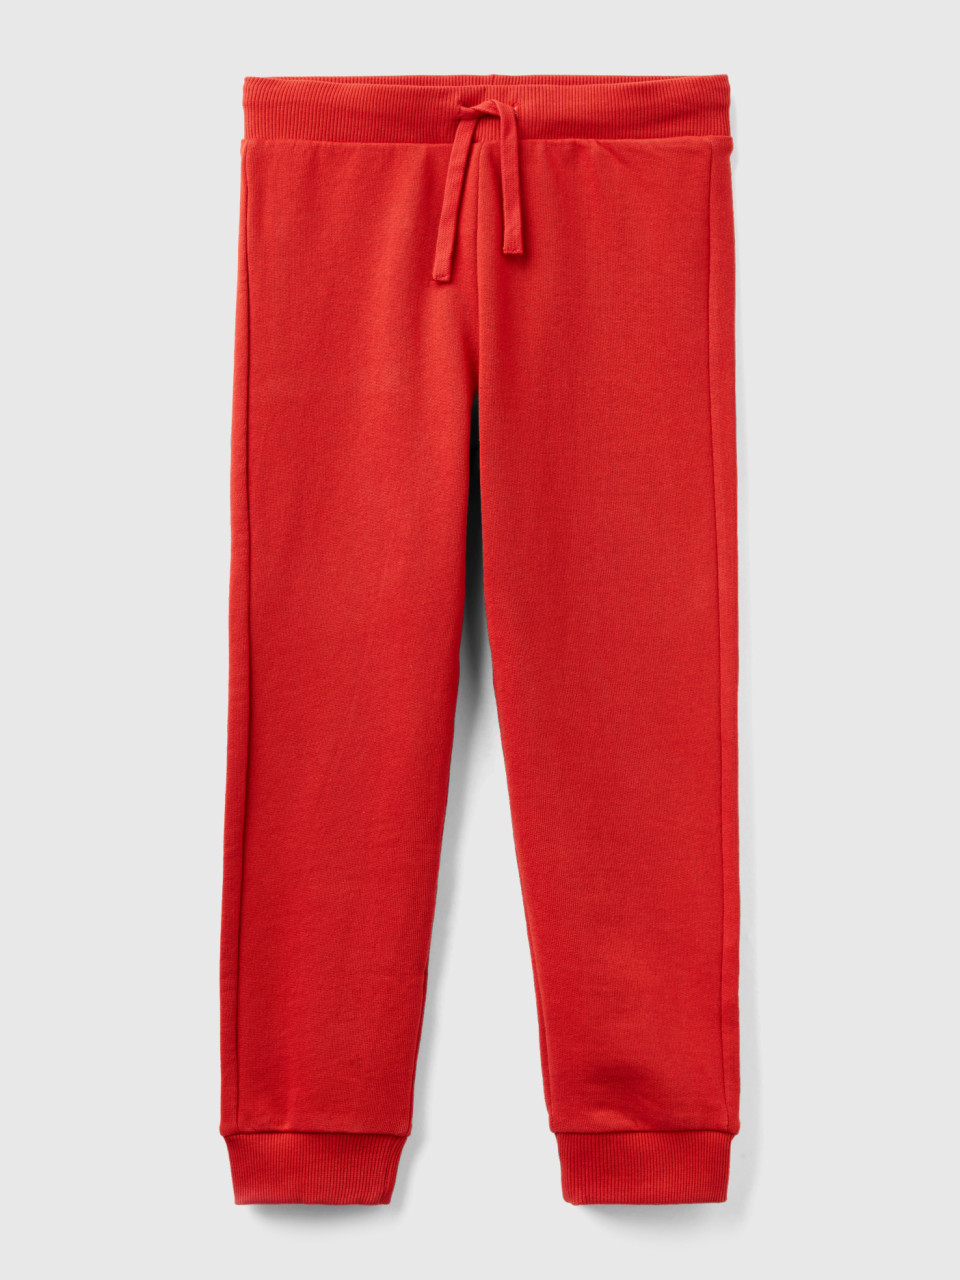 Benetton, Sporty Trousers With Drawstring, Brick Red, Kids